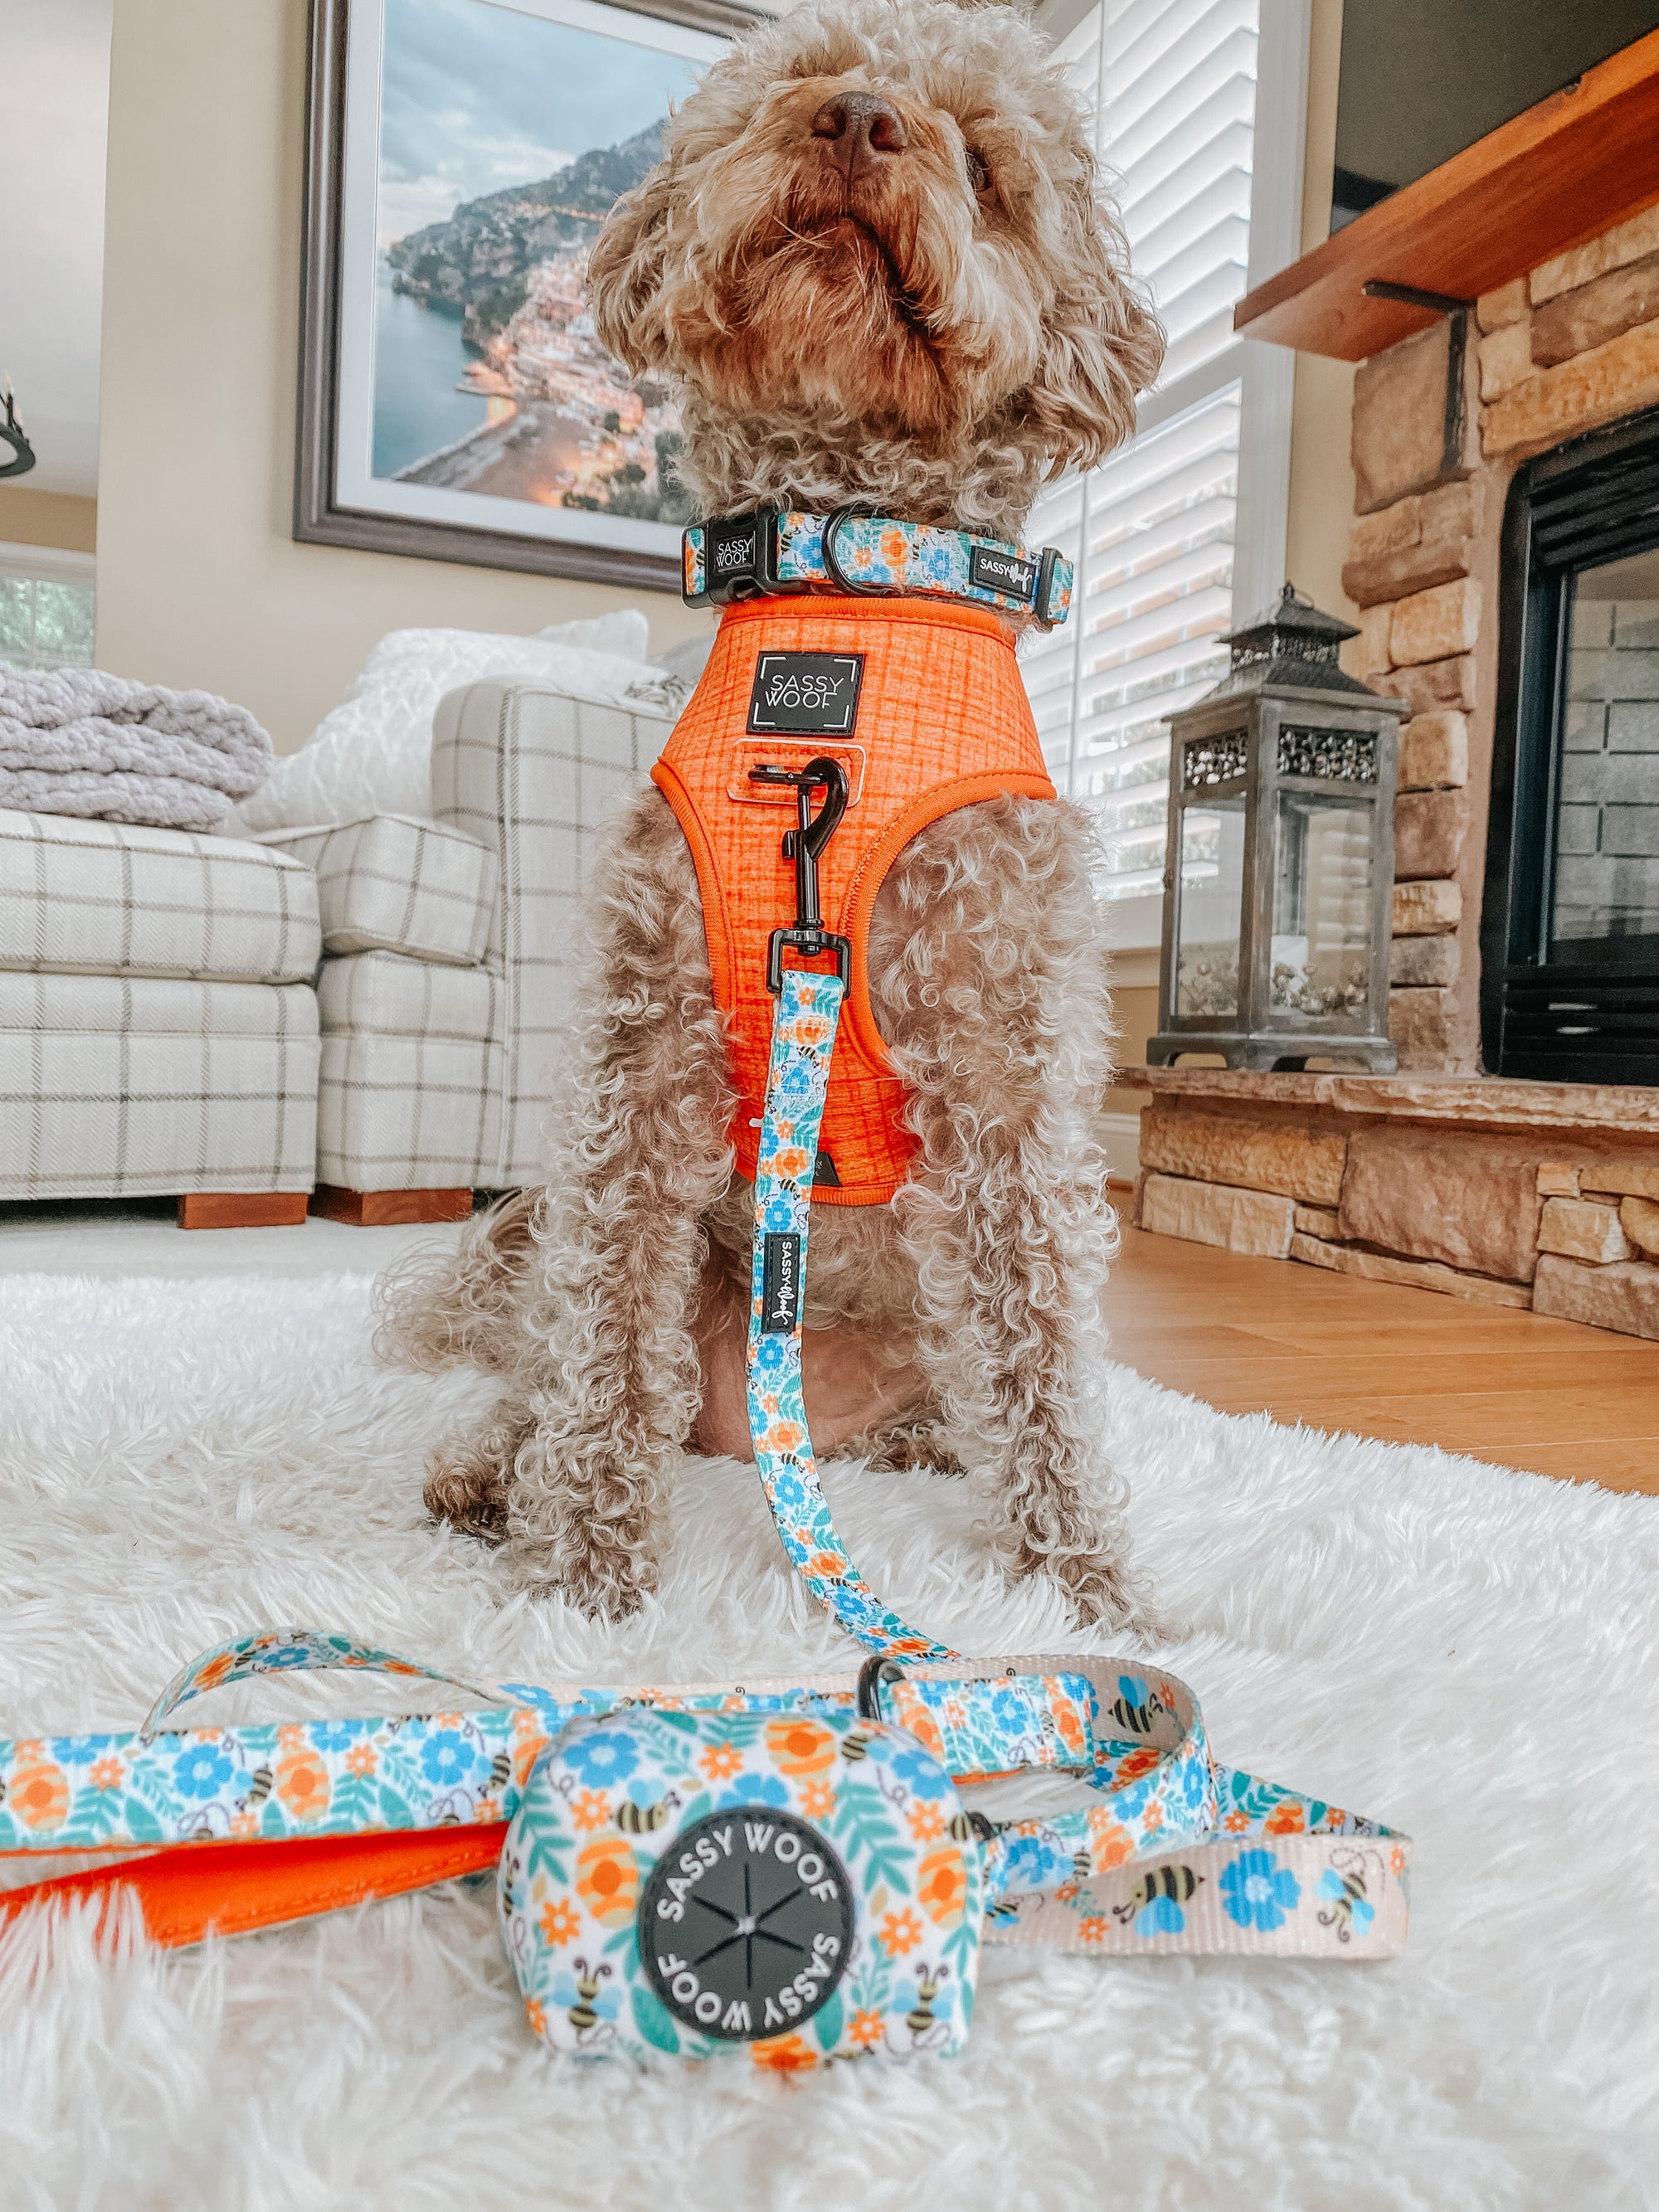 INFLUENCER_CONTENT | @HARPERTHECHOCOLATEDOODLE | SIZE M & M